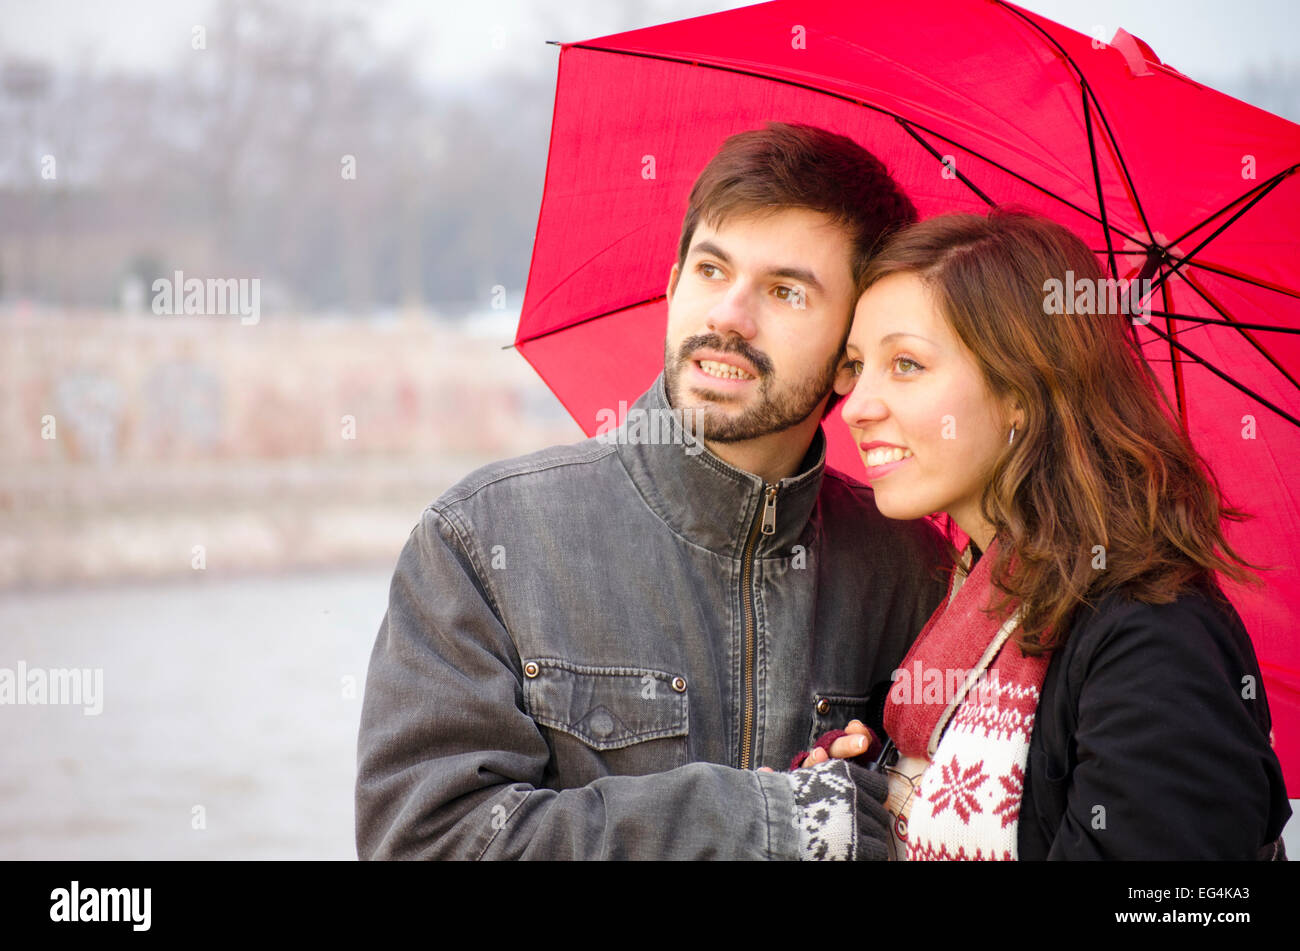 Woman and a bearded man under a red umbrella on a rainy day, outdoors, Stock Photo